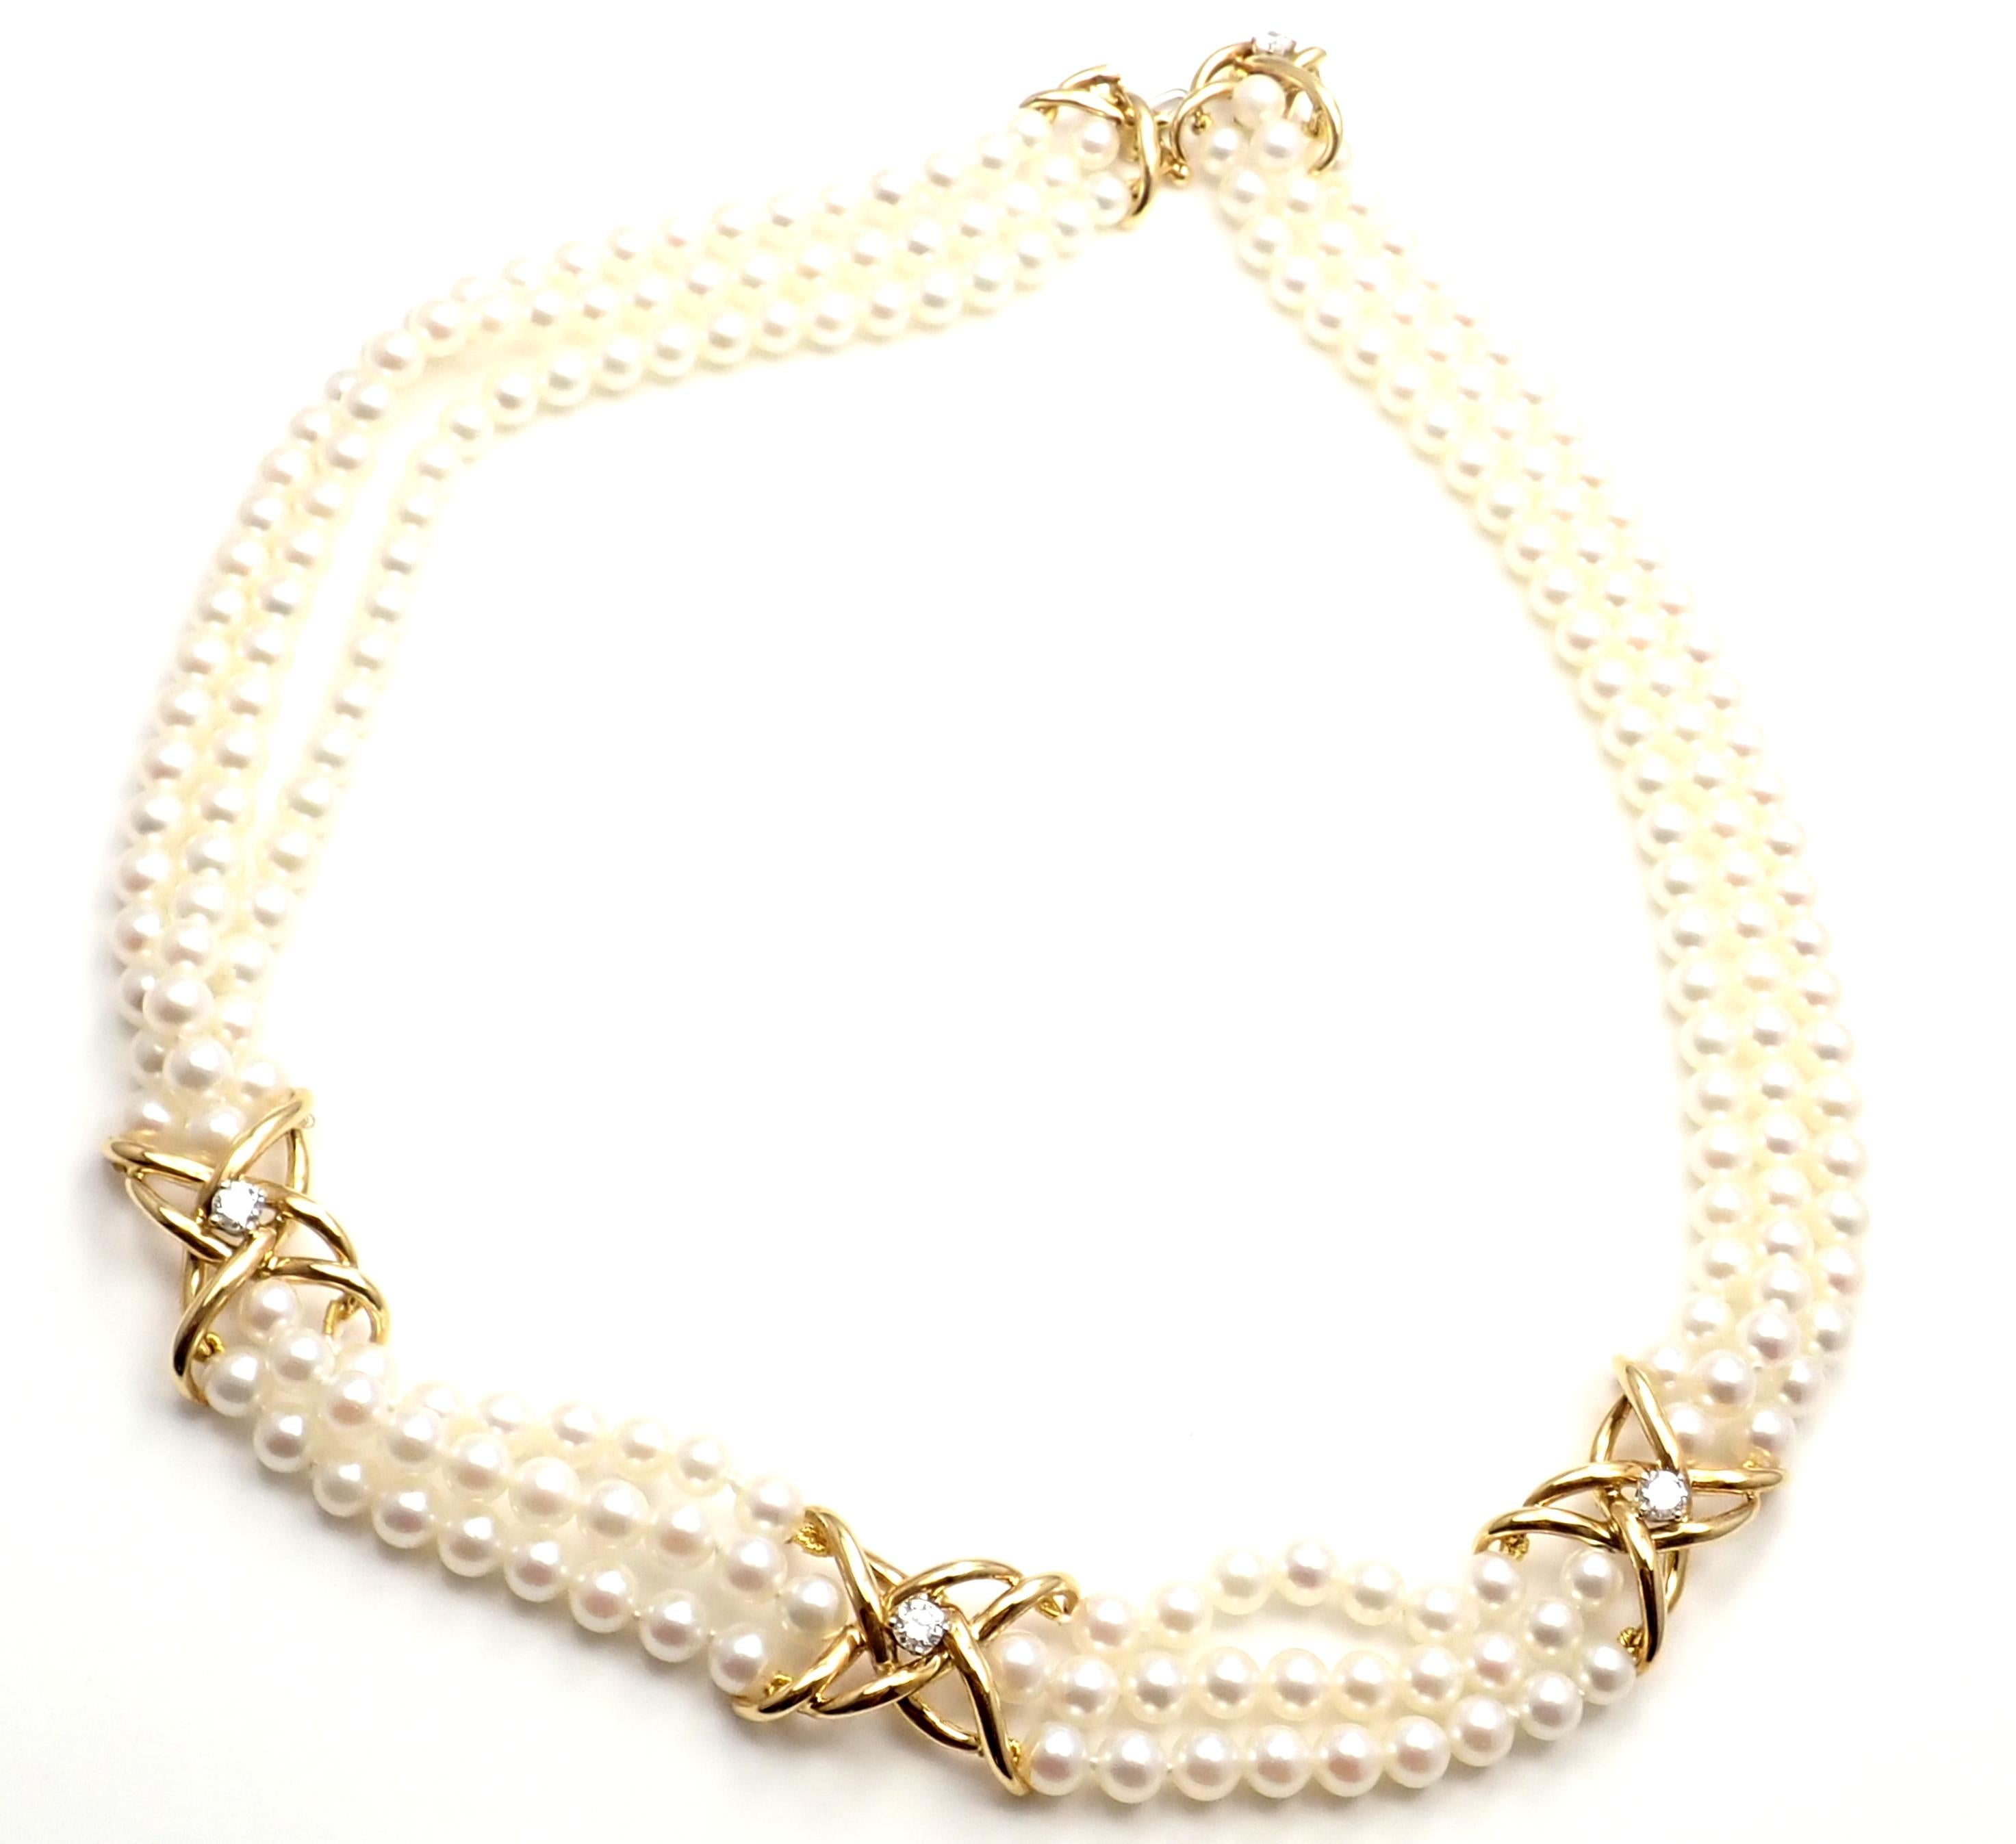 18k Yellow Diamond triple strand cultured pearl necklace by Tiffany & Co. 
With 4 round brilliant cut diamonds VS1 clarity, G color total weight approx. .58ct
Akoya pearls measures 4.5mm - 5mm 
Details:
Measurements:
Necklace Length: 16